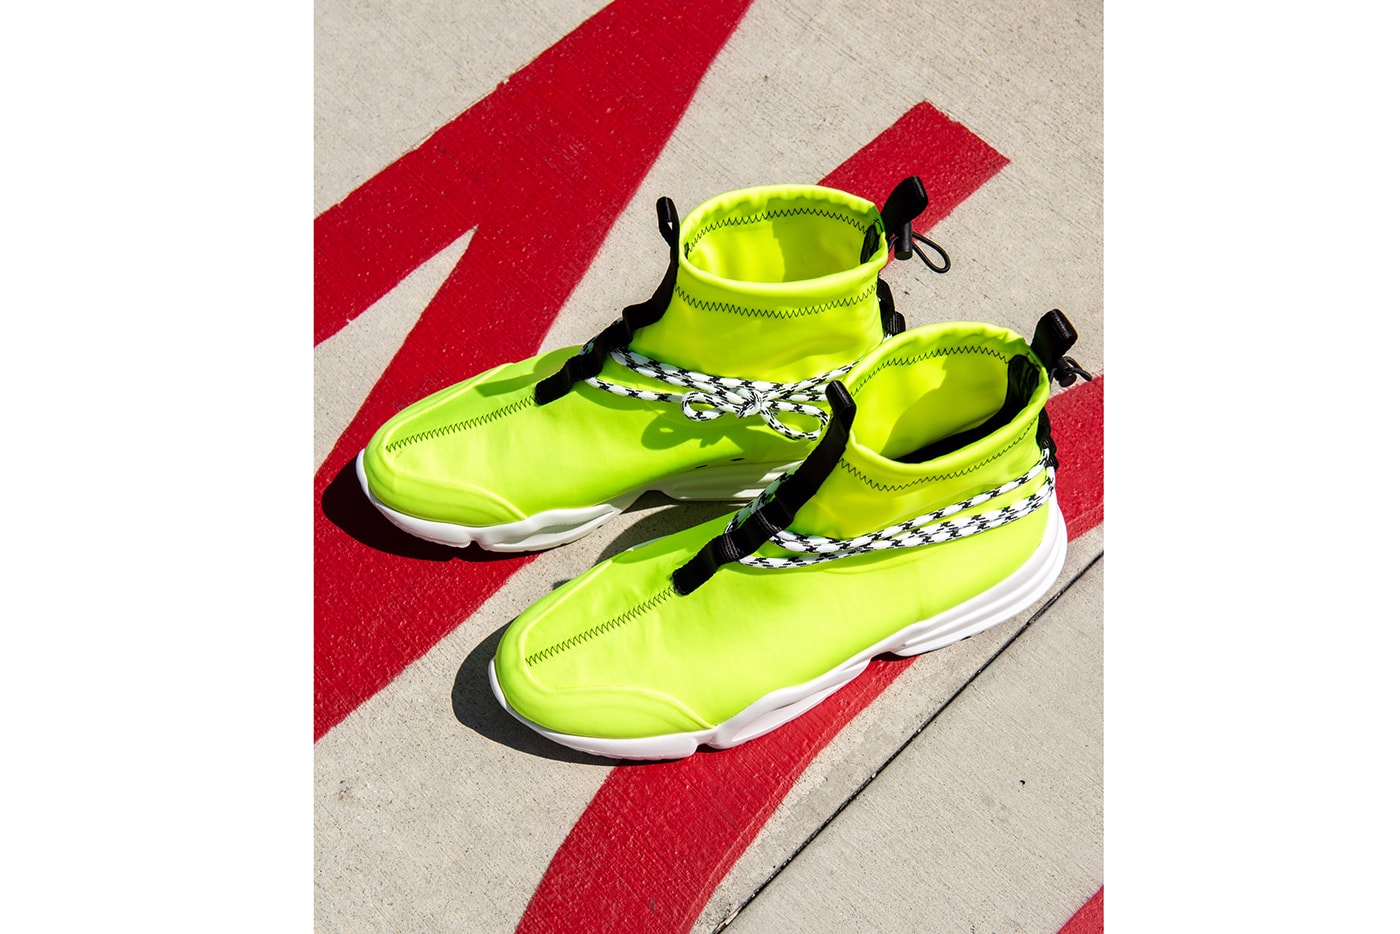 John Geiger Patron of the New Volt 002 collaborations release info sneakers